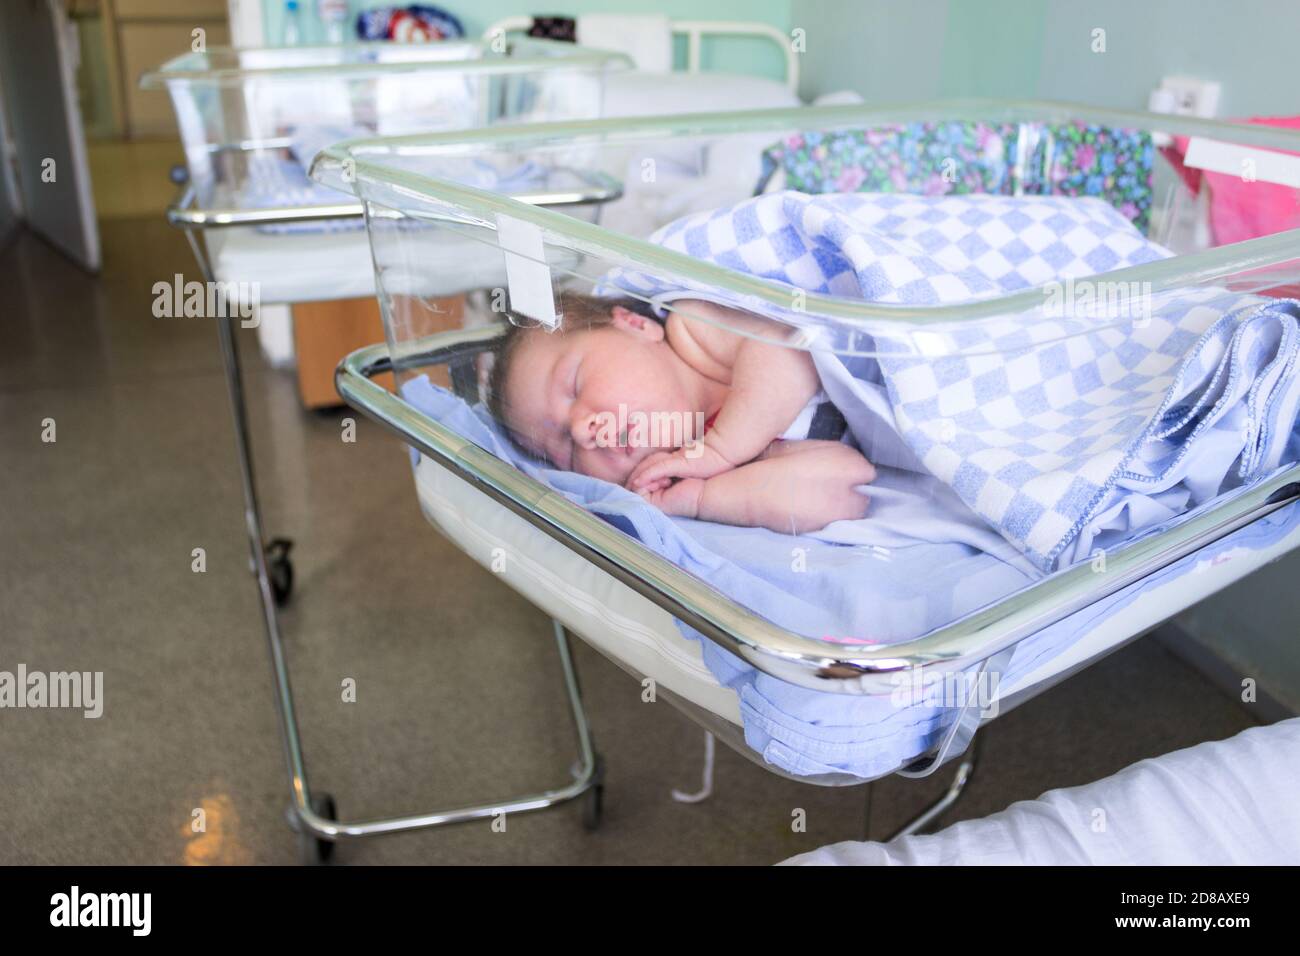 Cute little newborn baby sleeping in infant bed in hospital, folded hands with open mouth, under blanket Stock Photo